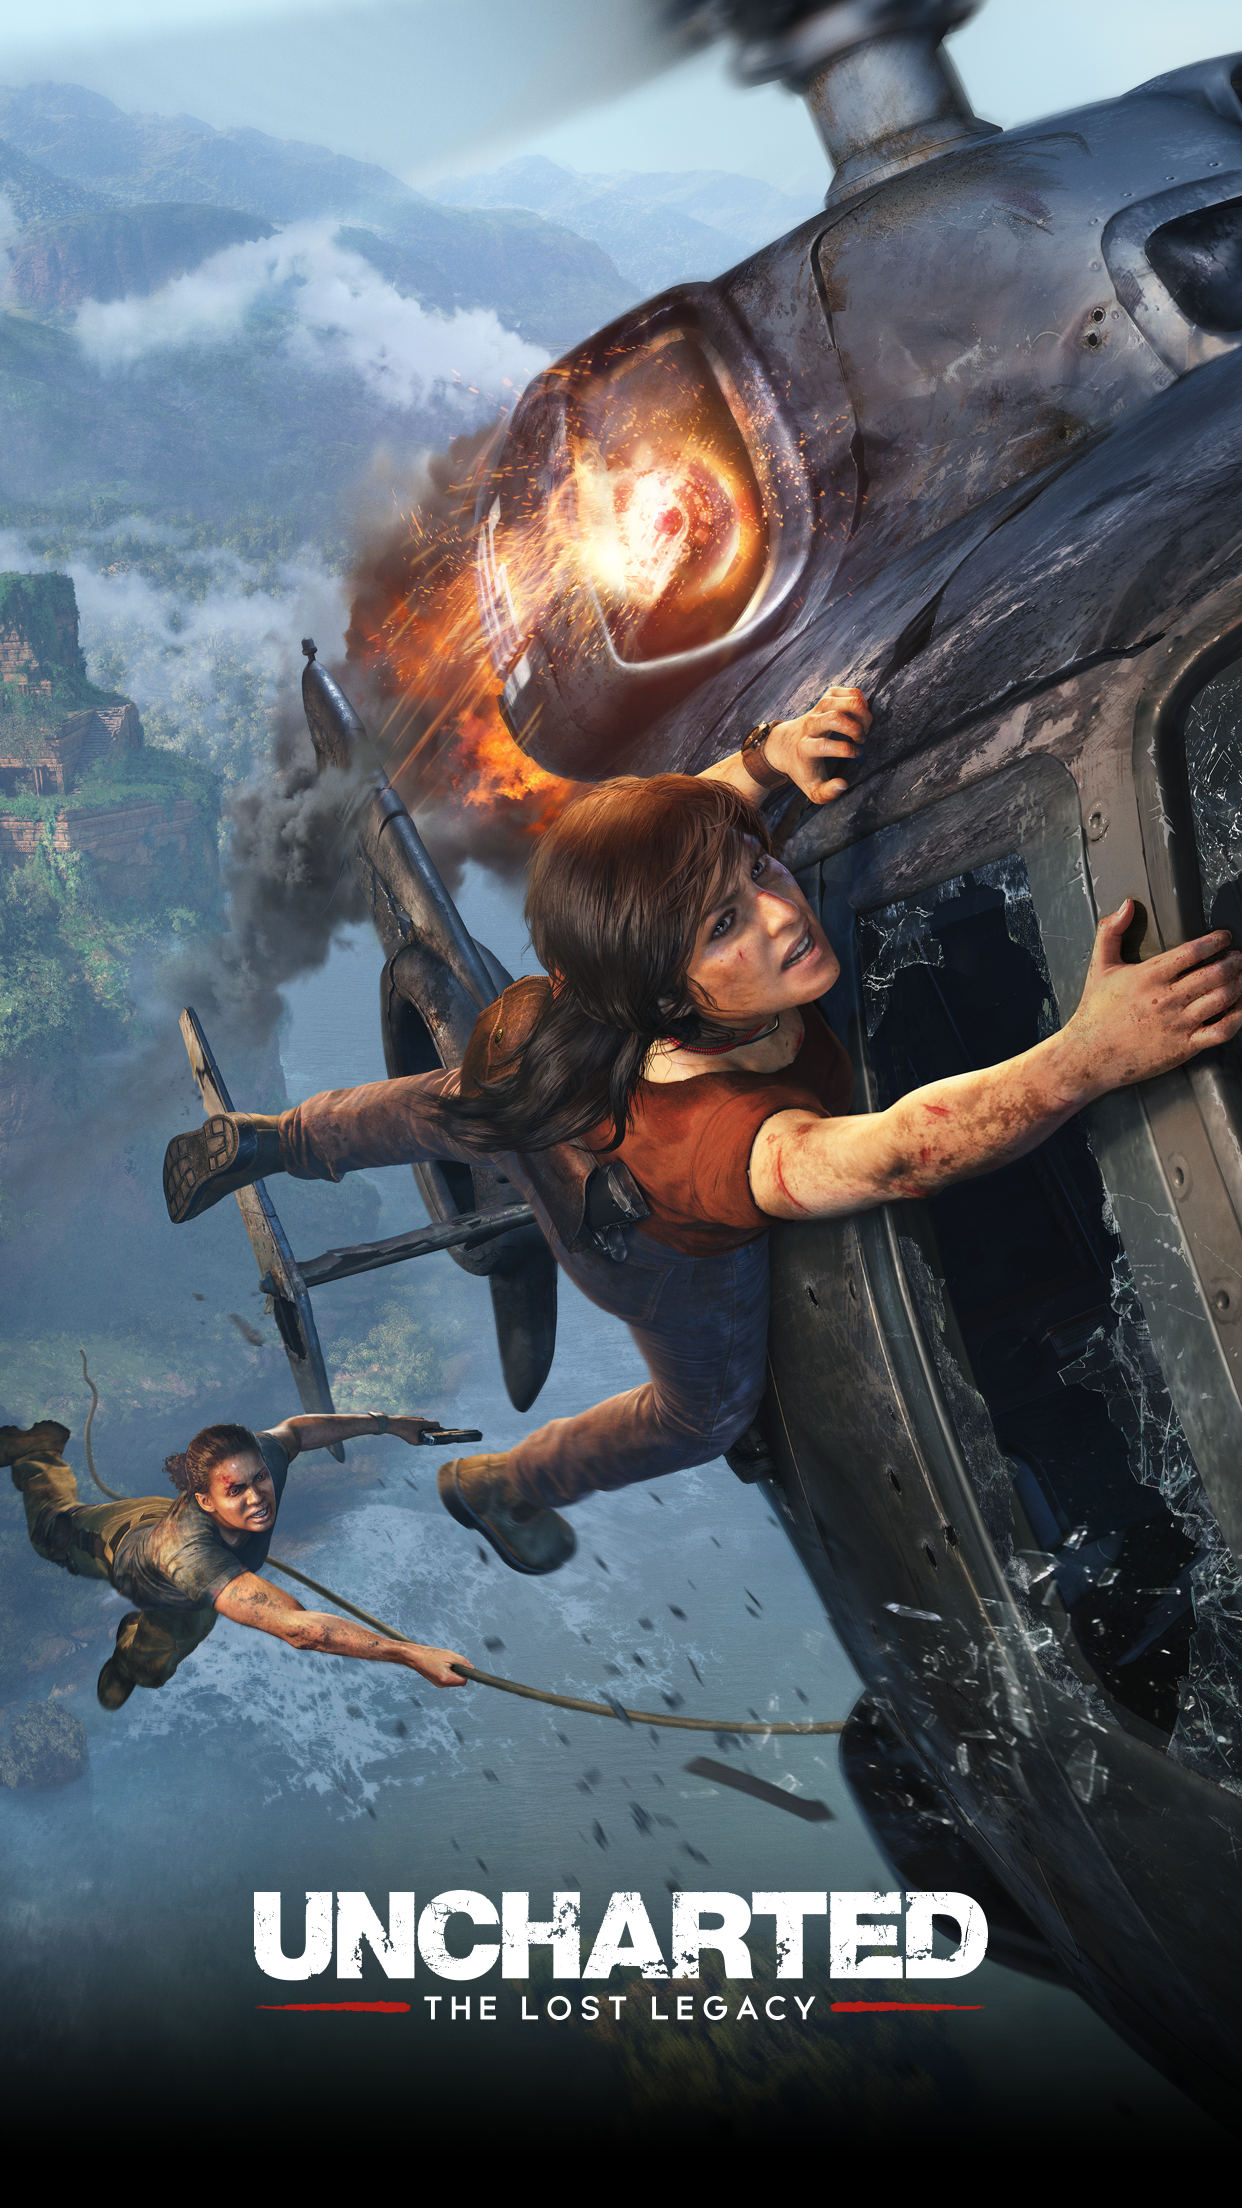 Uncharted Legacy Of Thieves HD Game Wallpapers